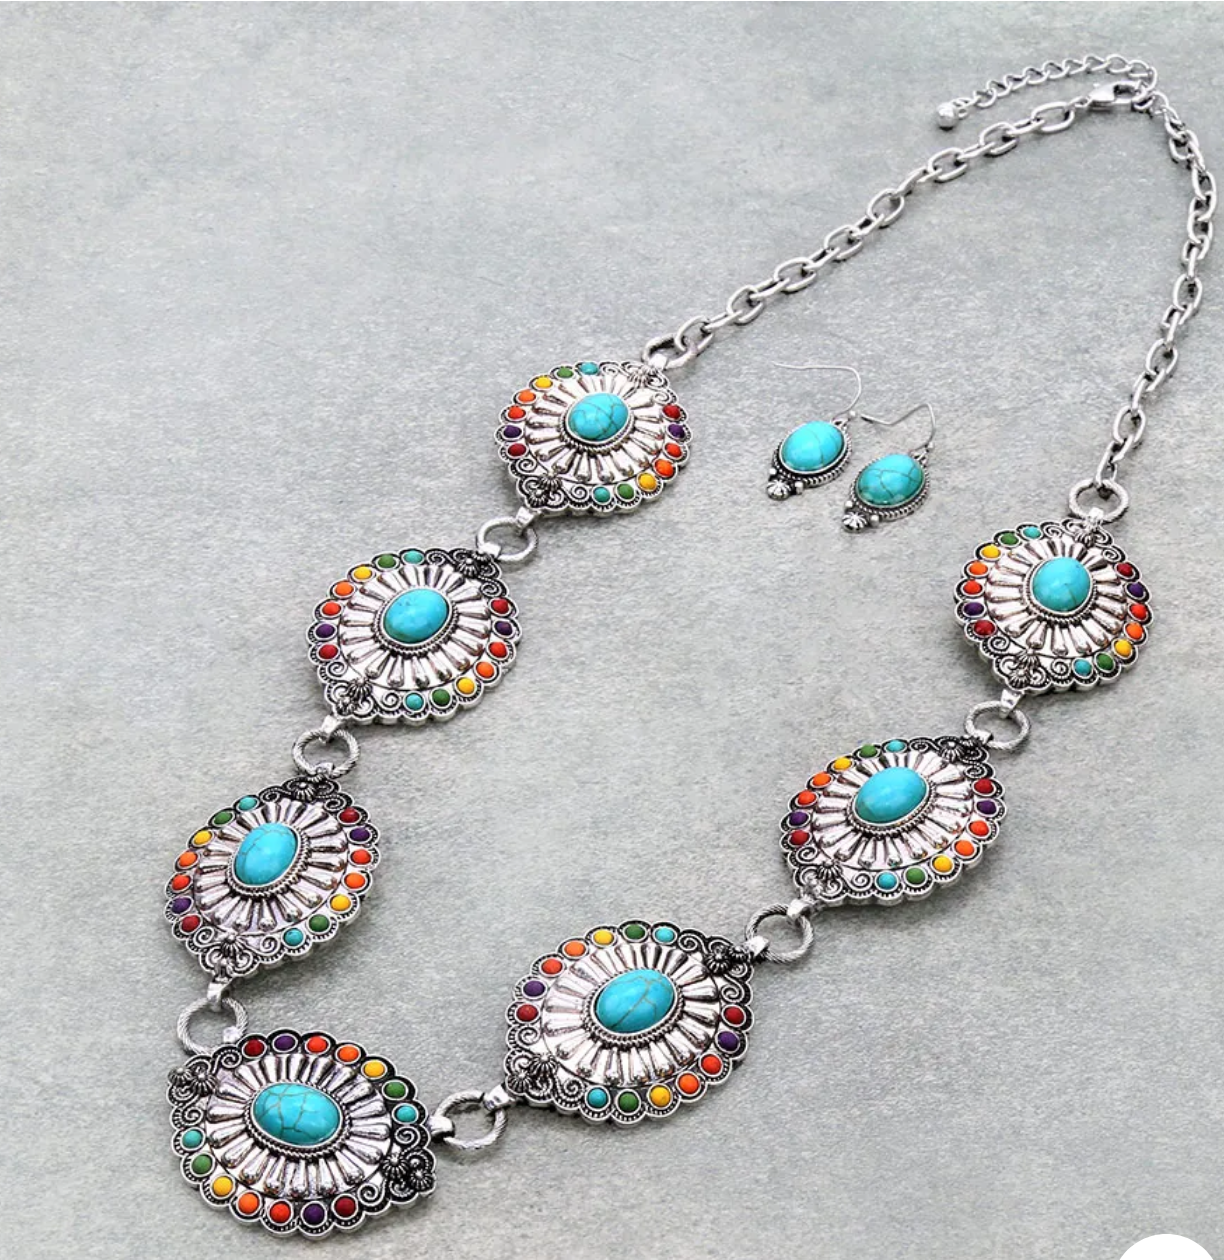 Western Concho Statement Necklace Set